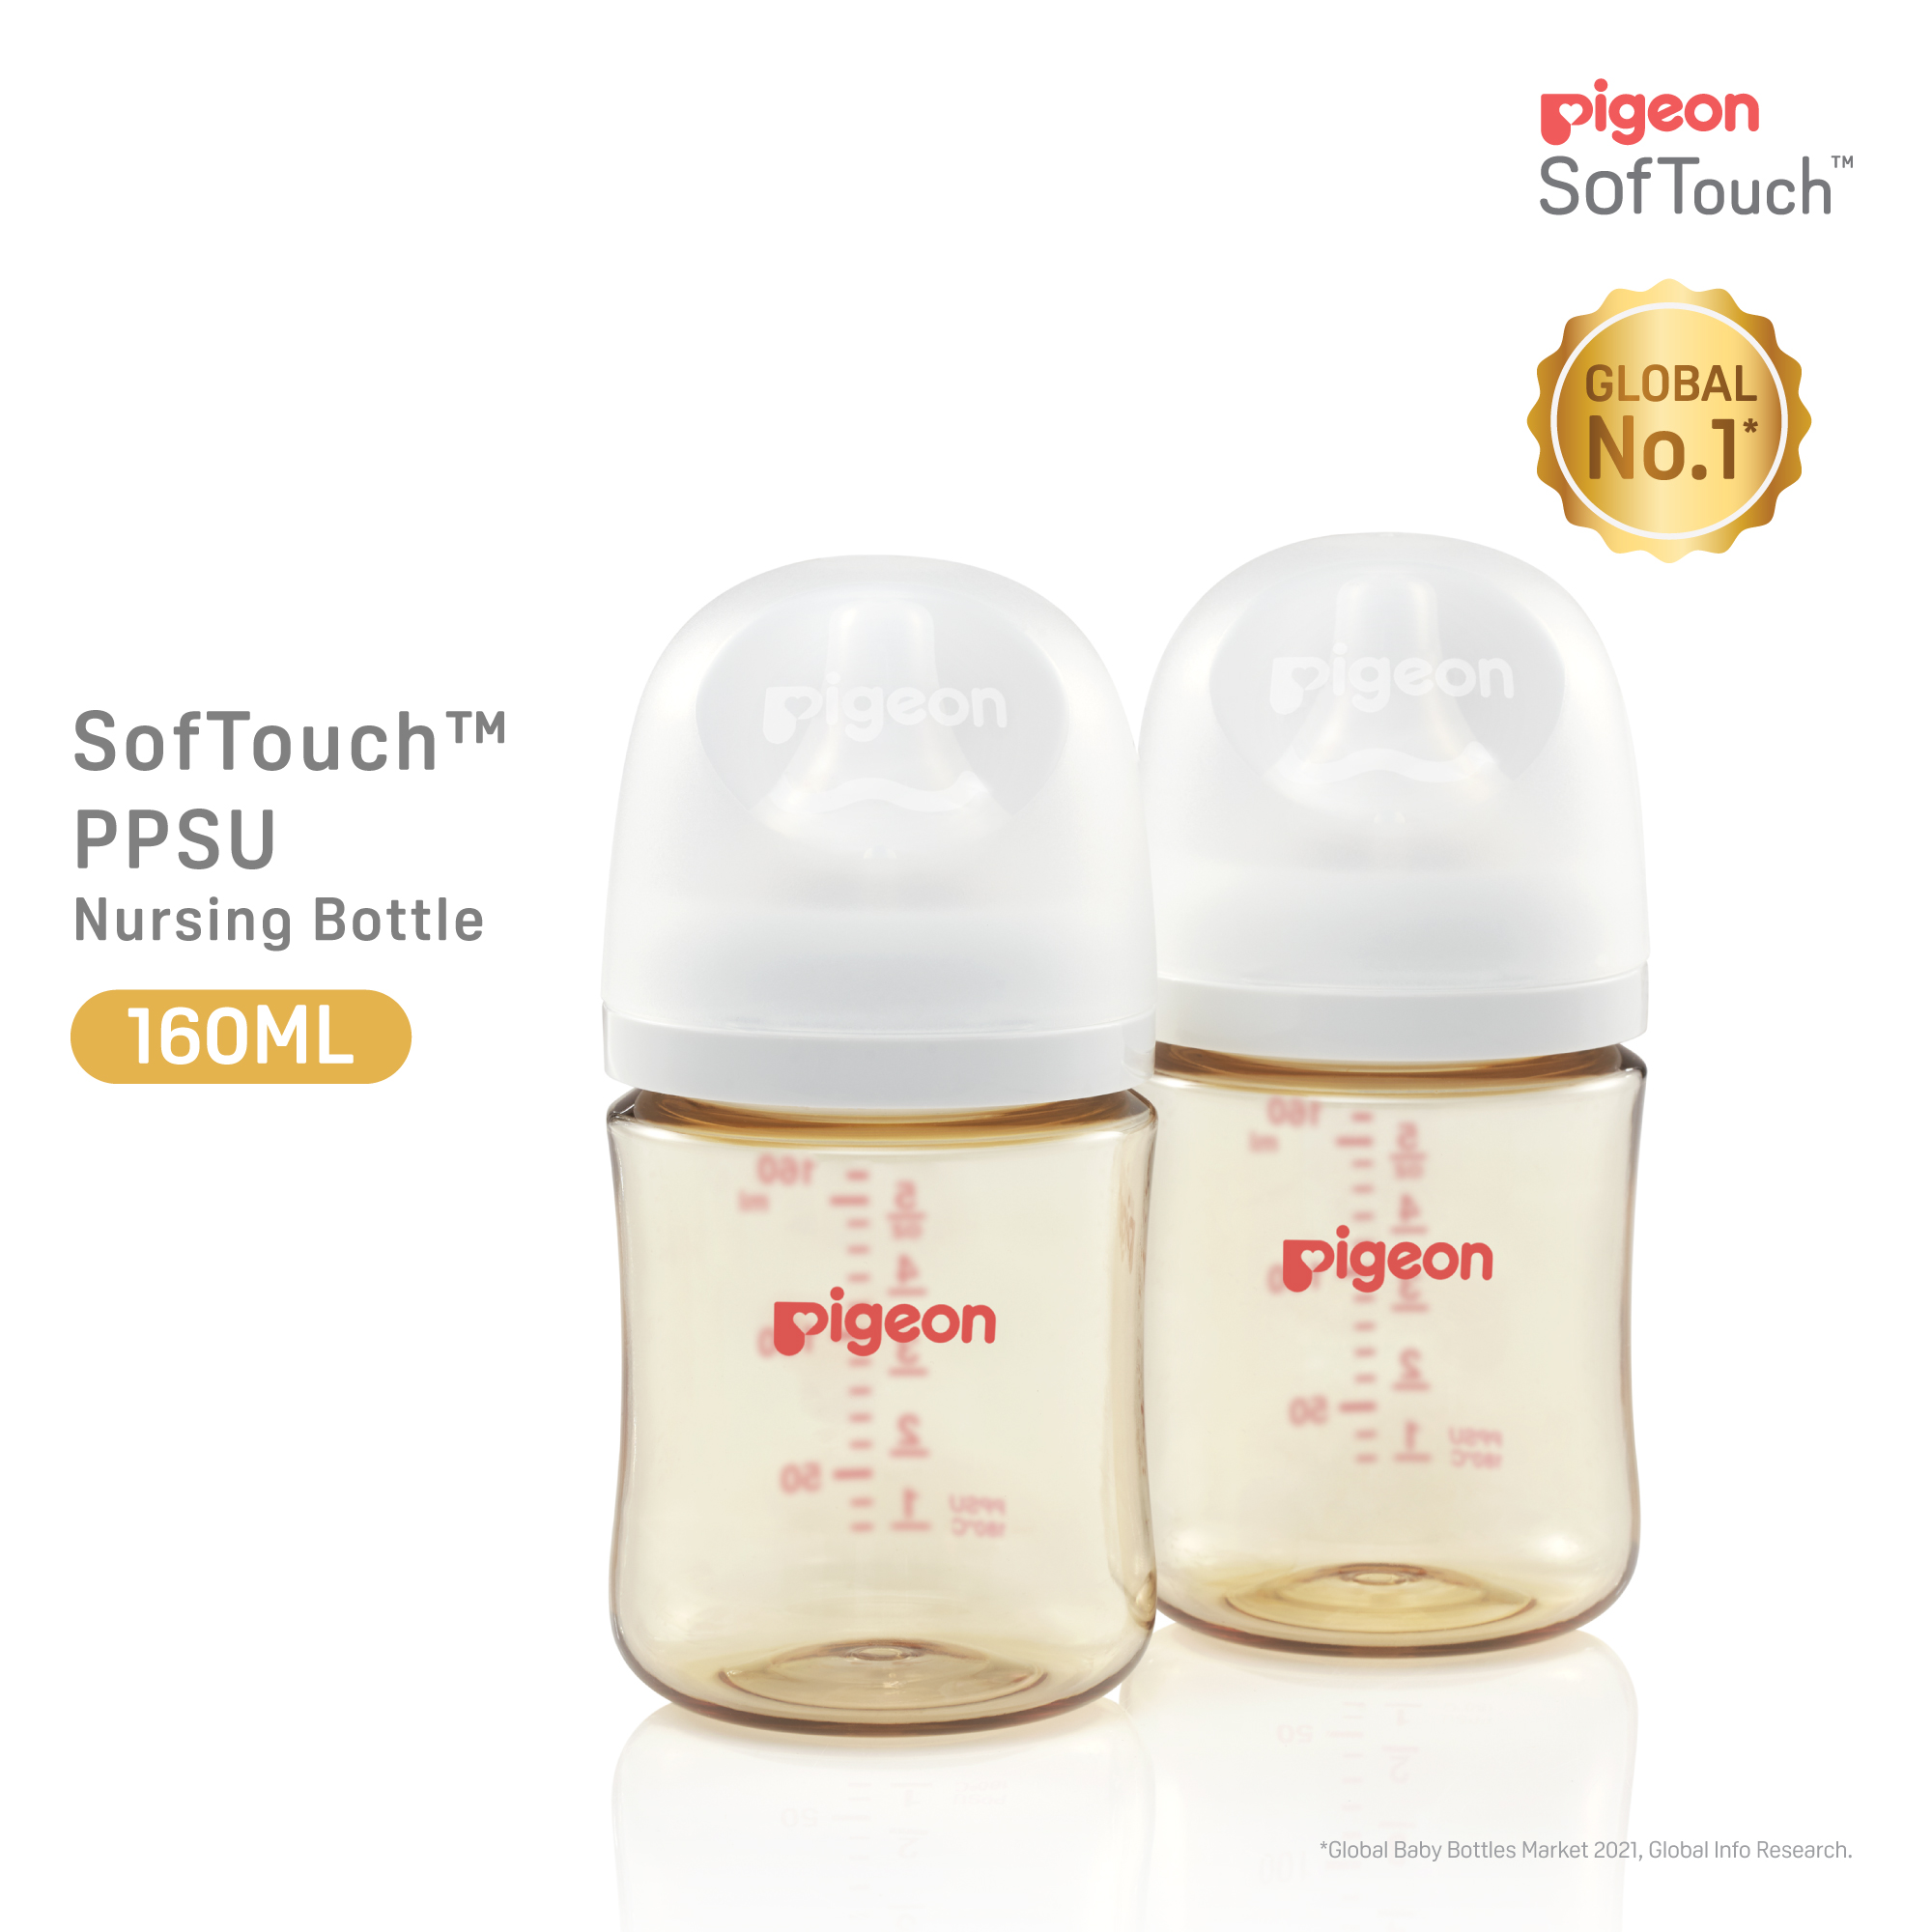 Pigeon SofTouch 3 Nursing Bottle Twin Pack PPSU 160ml (PG-79440)